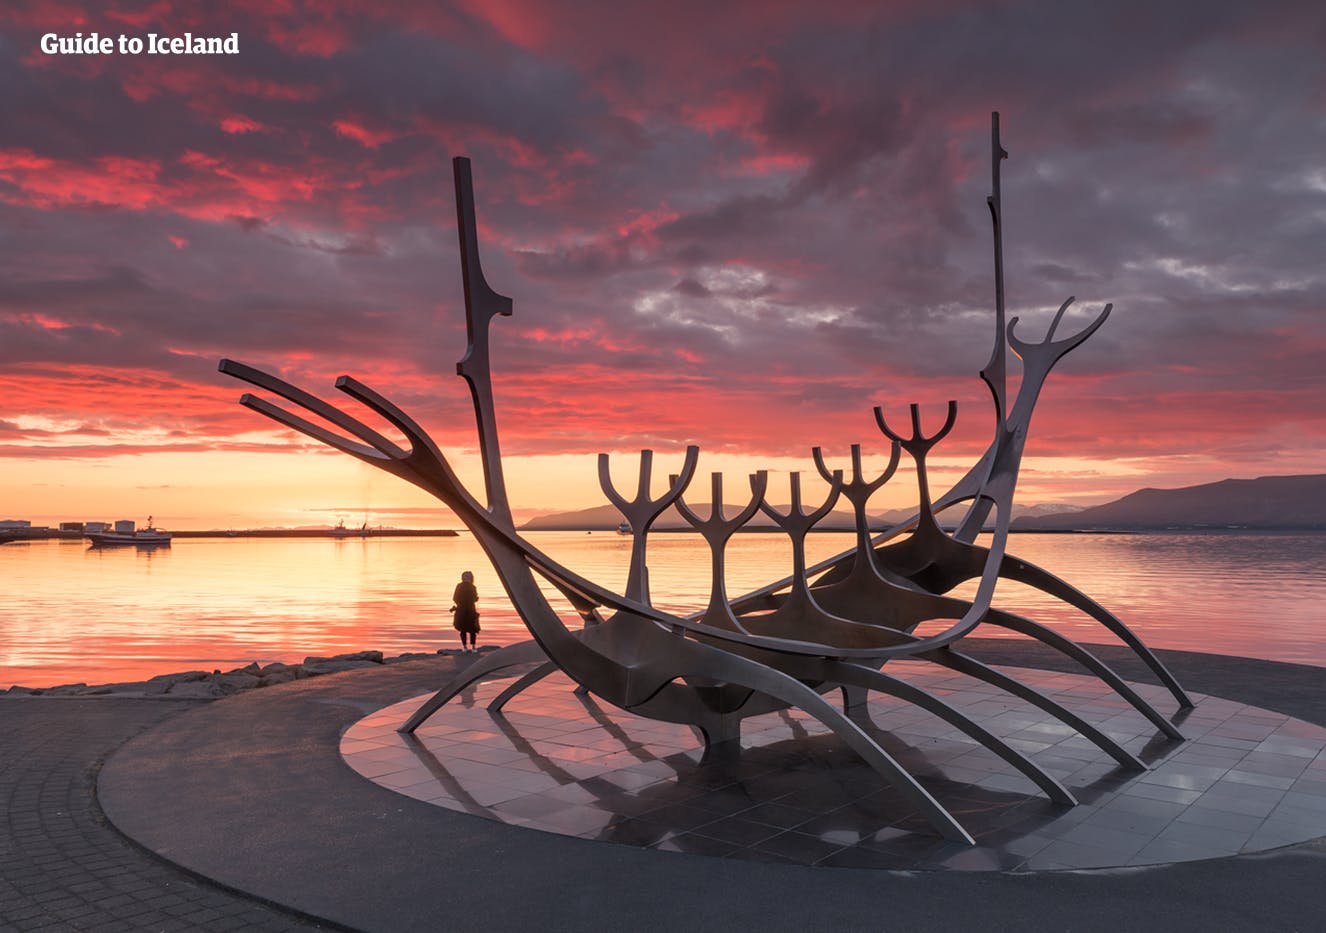 The Sun Voyager Monument which sits on the shoreline of Reykjavik, Iceland's capital city.